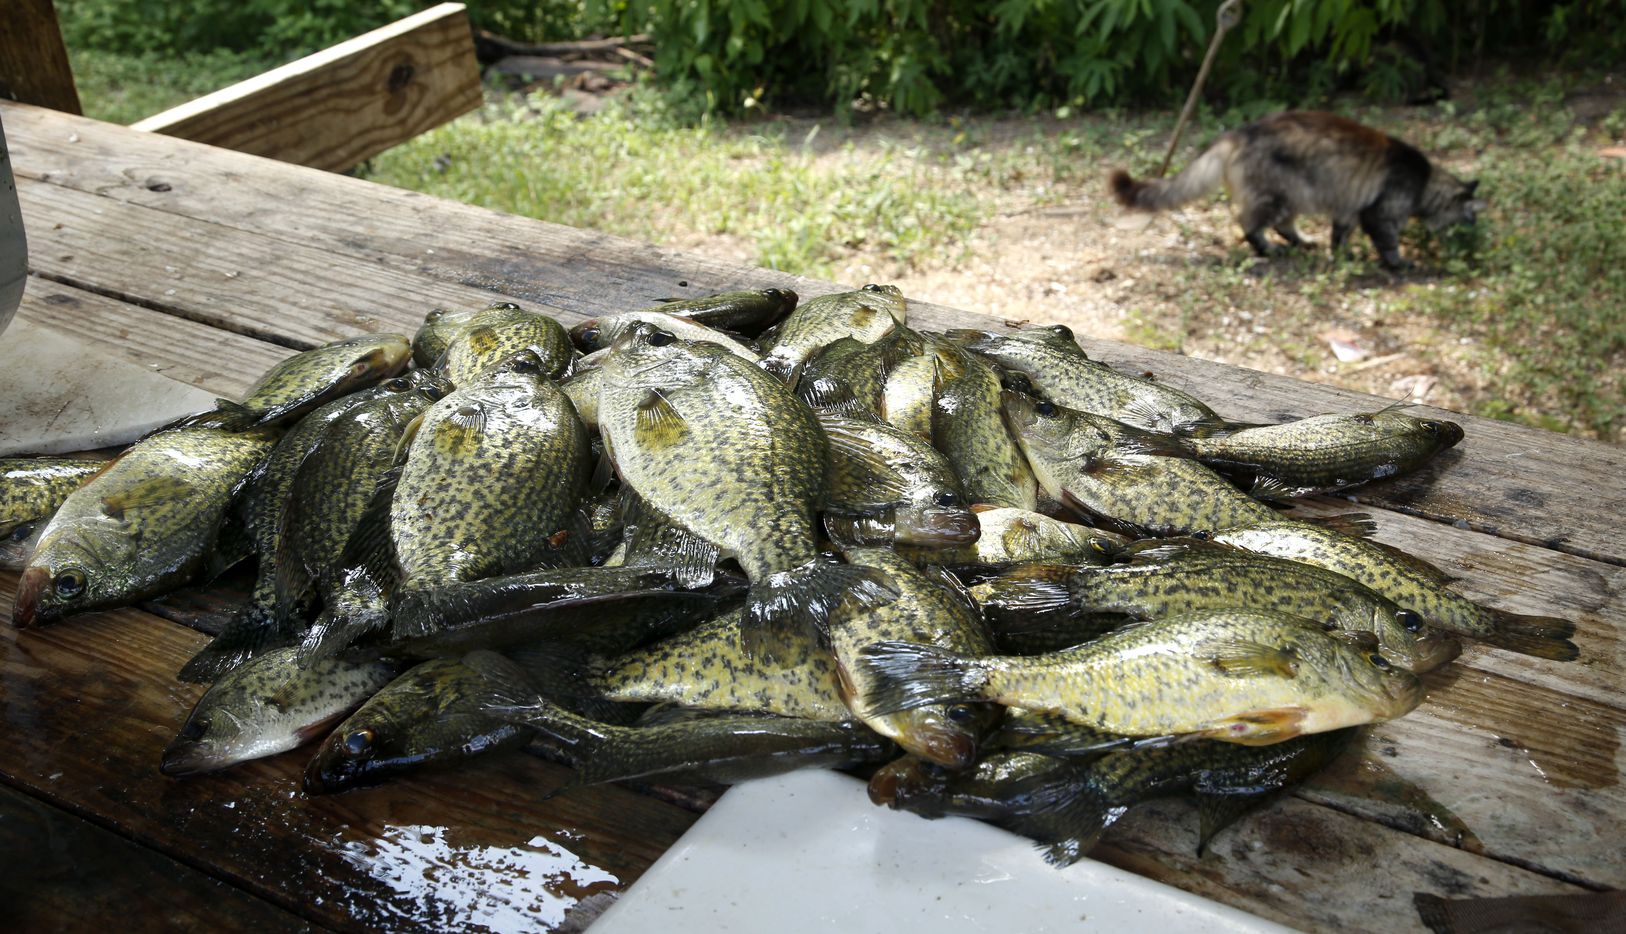 An early-morning haul of crappie lies on the cleaning table as a stray cat eats fish scraps...